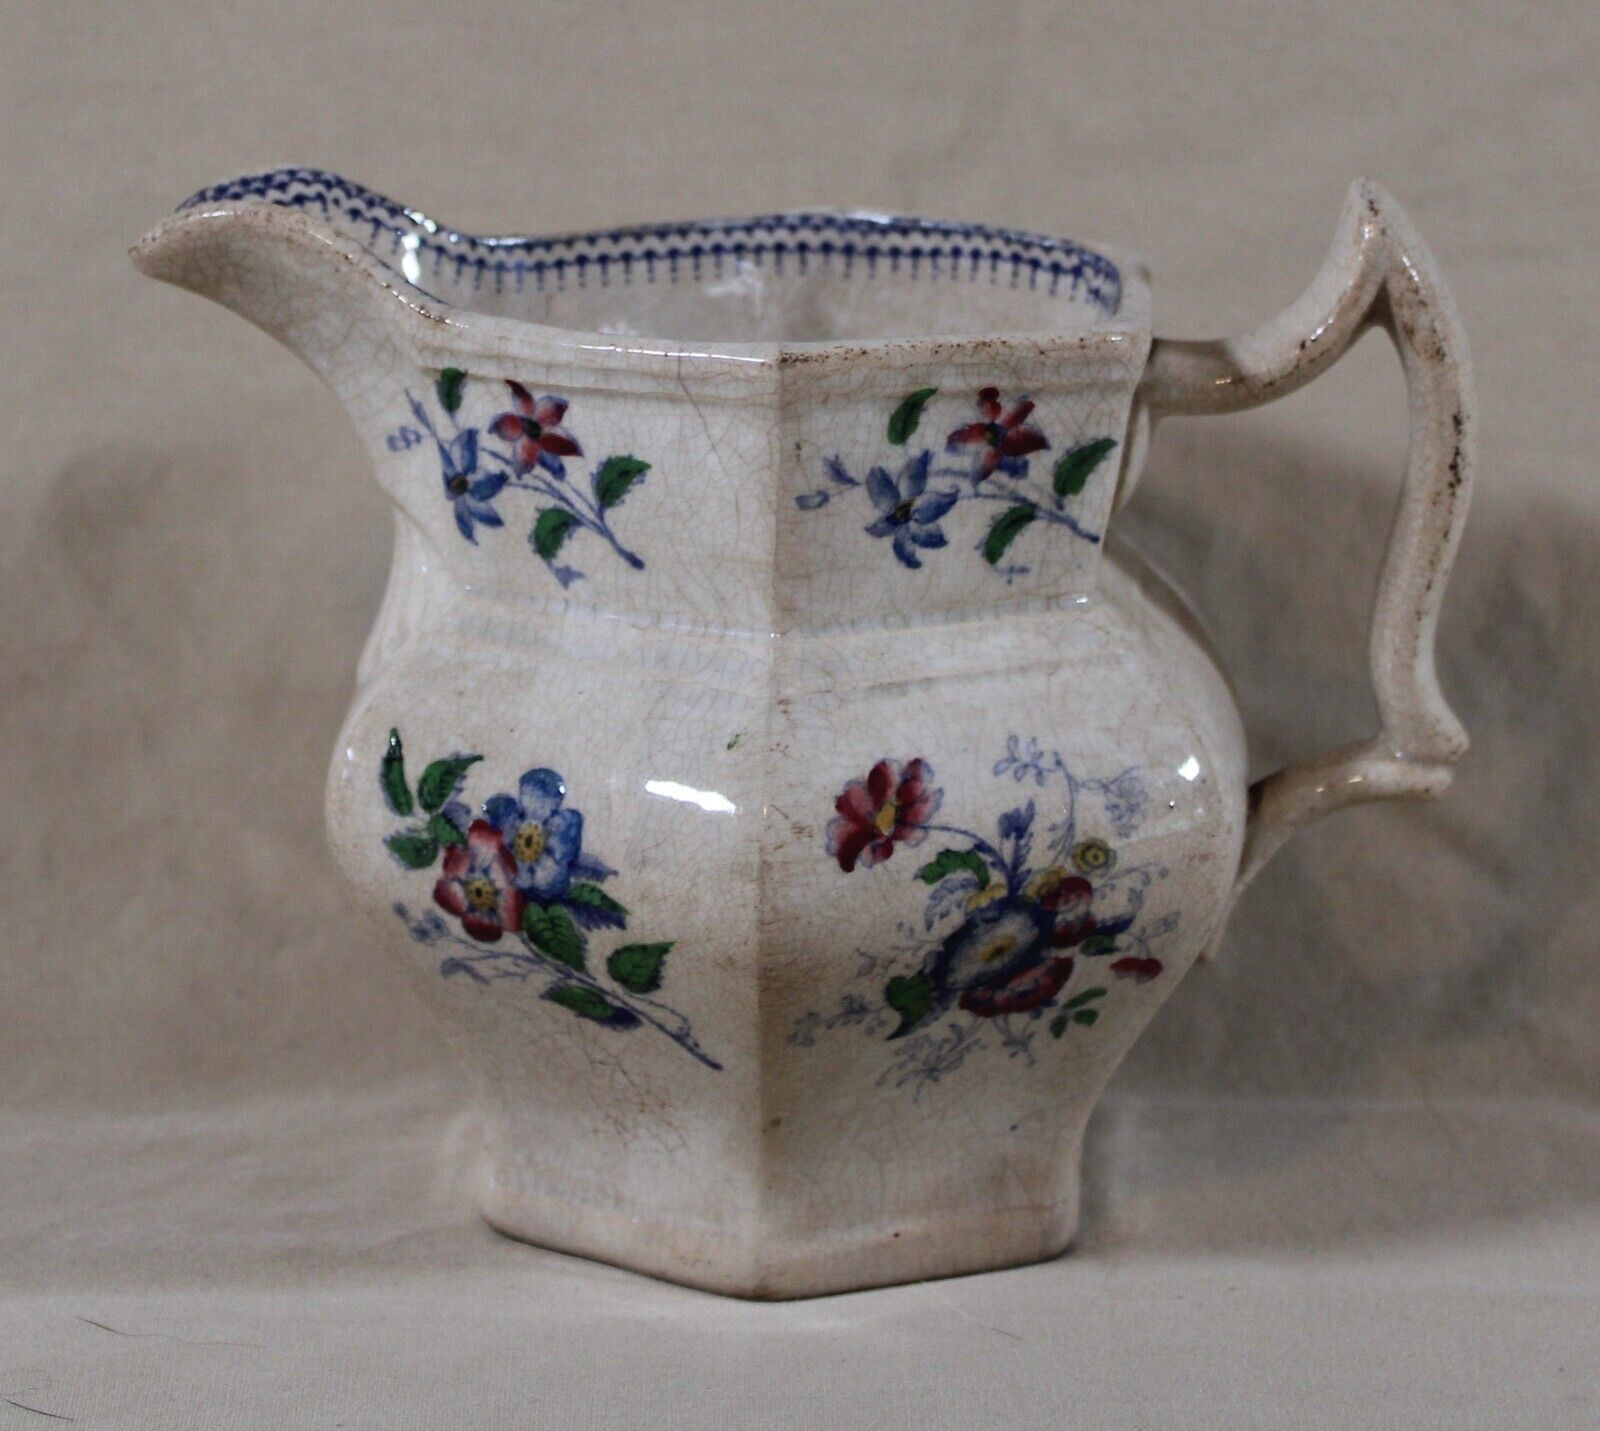 Antique Vintage Floral Stained Crazed Ironstone Pitcher Shabby Chic, 1880s